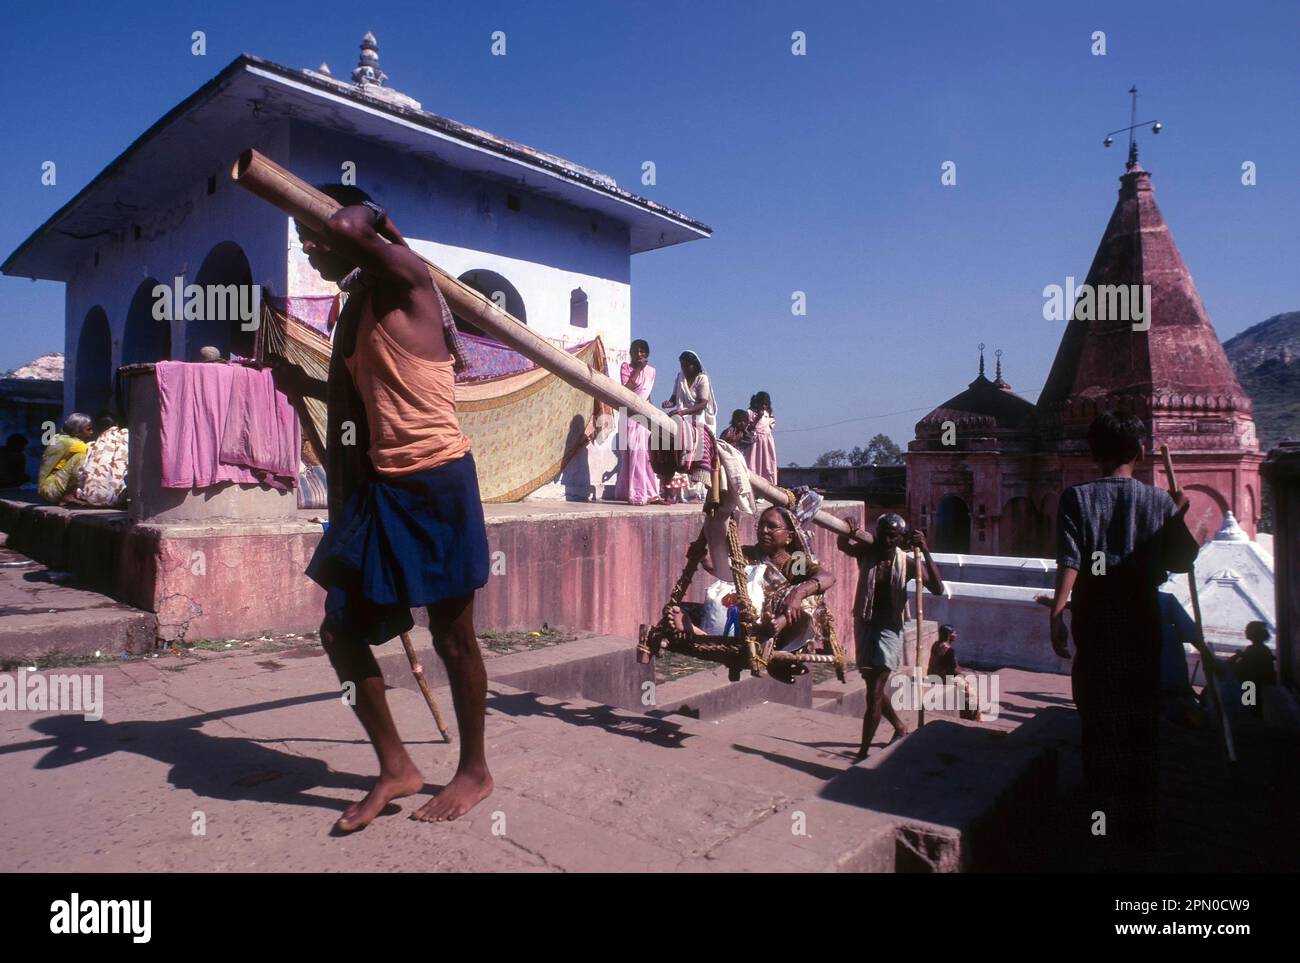 Dolly carriers, temple adjacent to hot water springs in Rajgir, Bihar, India, Asia Stock Photo